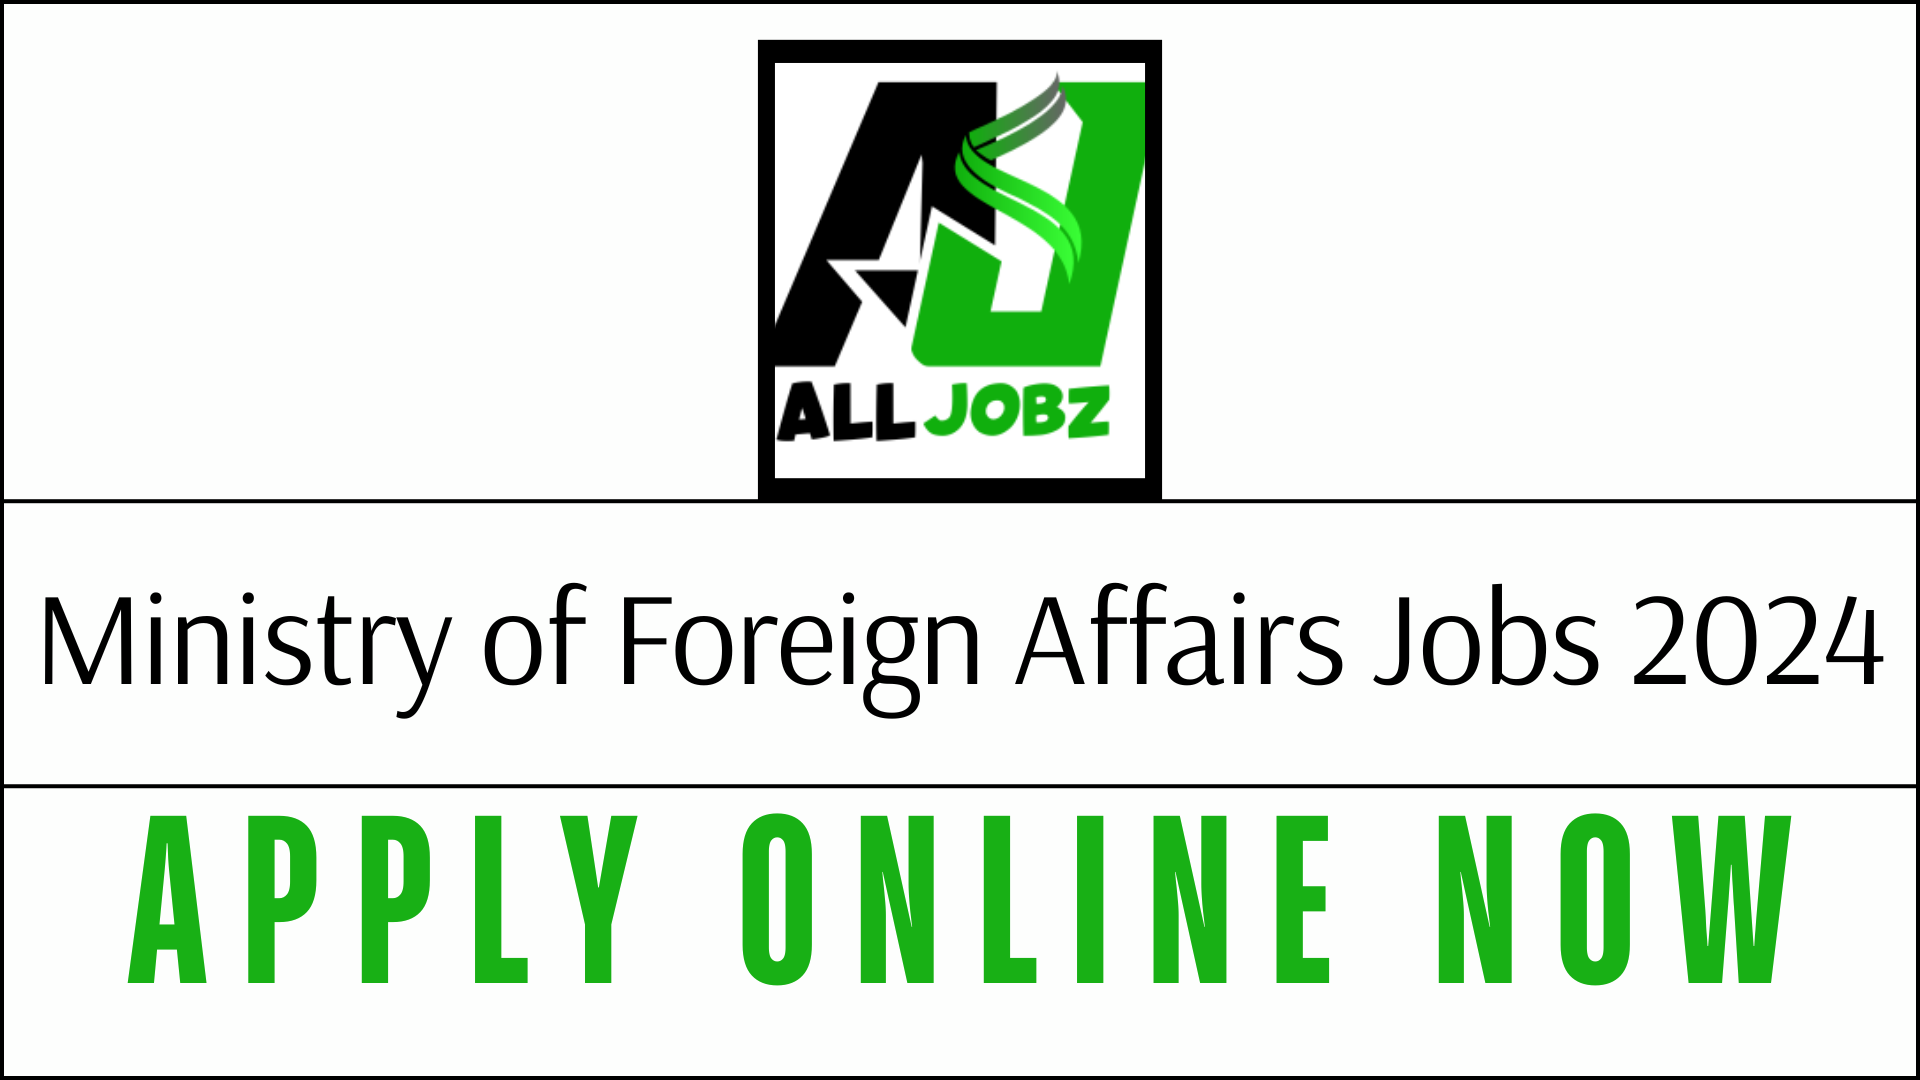 Vacancies Announcement At Ministry Of Foreign Affairs 2024, Vacancies Announcement At Ministry Of Foreign Affairs 2024 Apply Online, Ministry Of Foreign Affairs Jobs 2024, Ministry Of Foreign Affairs Jobs Online Apply, Ministry Of Foreign Affairs Jobs Islamabad 2024, Mofa Jobs Advertisement, Www.mofa.gov.pk Jobs, Www.mofa.gov.pk Jobs Apply Online, Ministry Of Foreign Affairs Jobs 2024 For Pakistan, Ministry Of Foreign Affairs Jobs Online Apply, Ministry Of Foreign Affairs Jobs 2024 Apply Online, Ministry Of Foreign Affairs Jobs 2024 Application Form, Ministry Of Foreign Affairs Jobs In Pakistan,